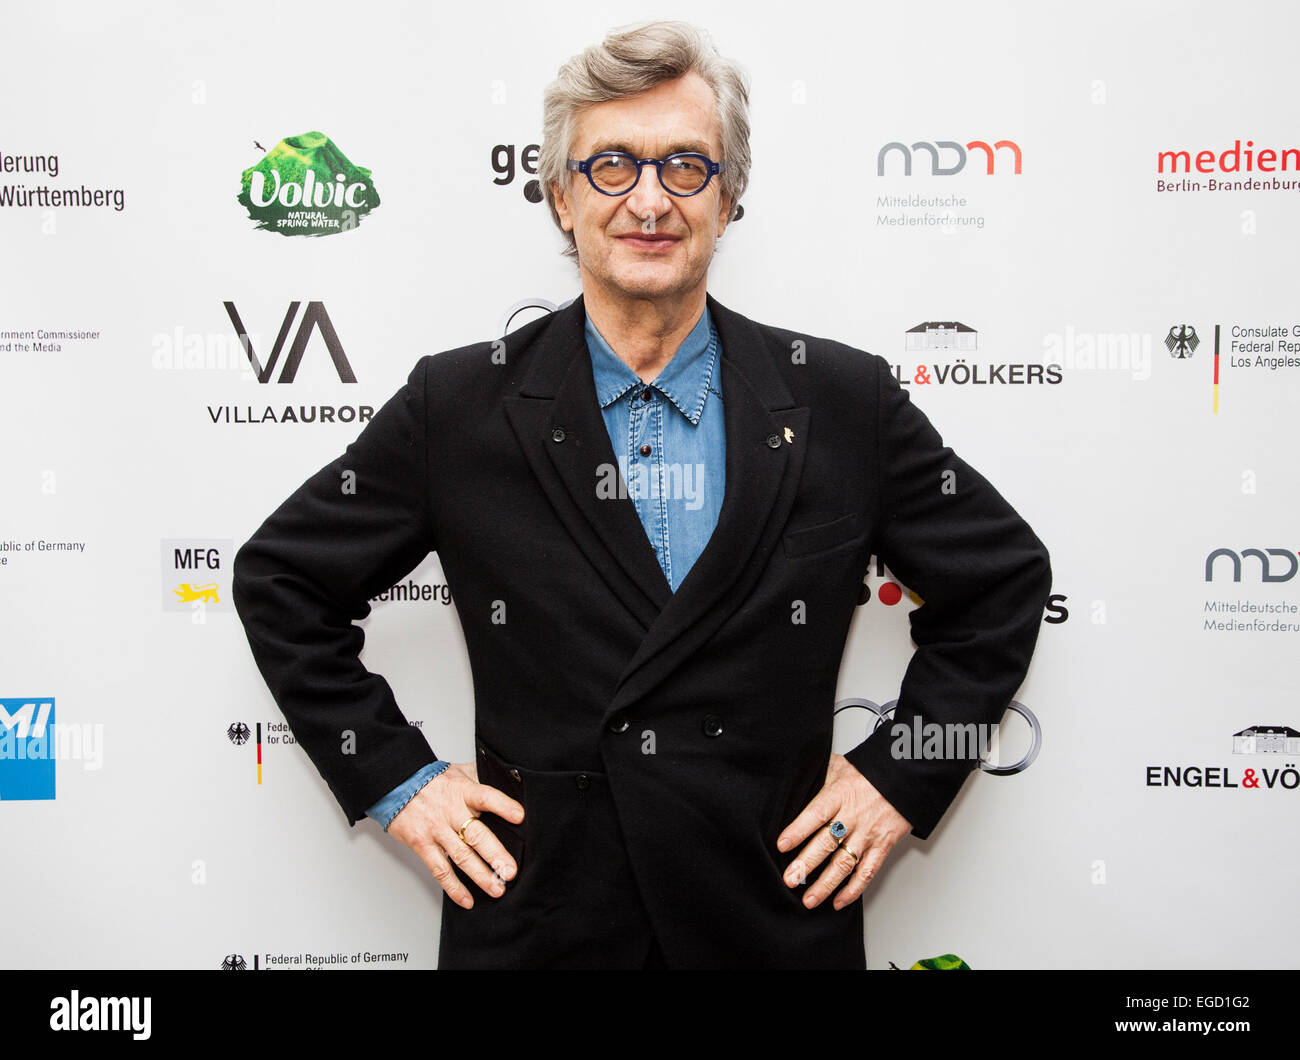 Wim Wenders at the German Films and the Consulate General of the Federal Republic Of Germany's German Oscar nominees reception held at Villa Aurora in Pacific Palisades on February 21, 2015. Credit: Flaminia Fanale/Lumeimages.com Stock Photo